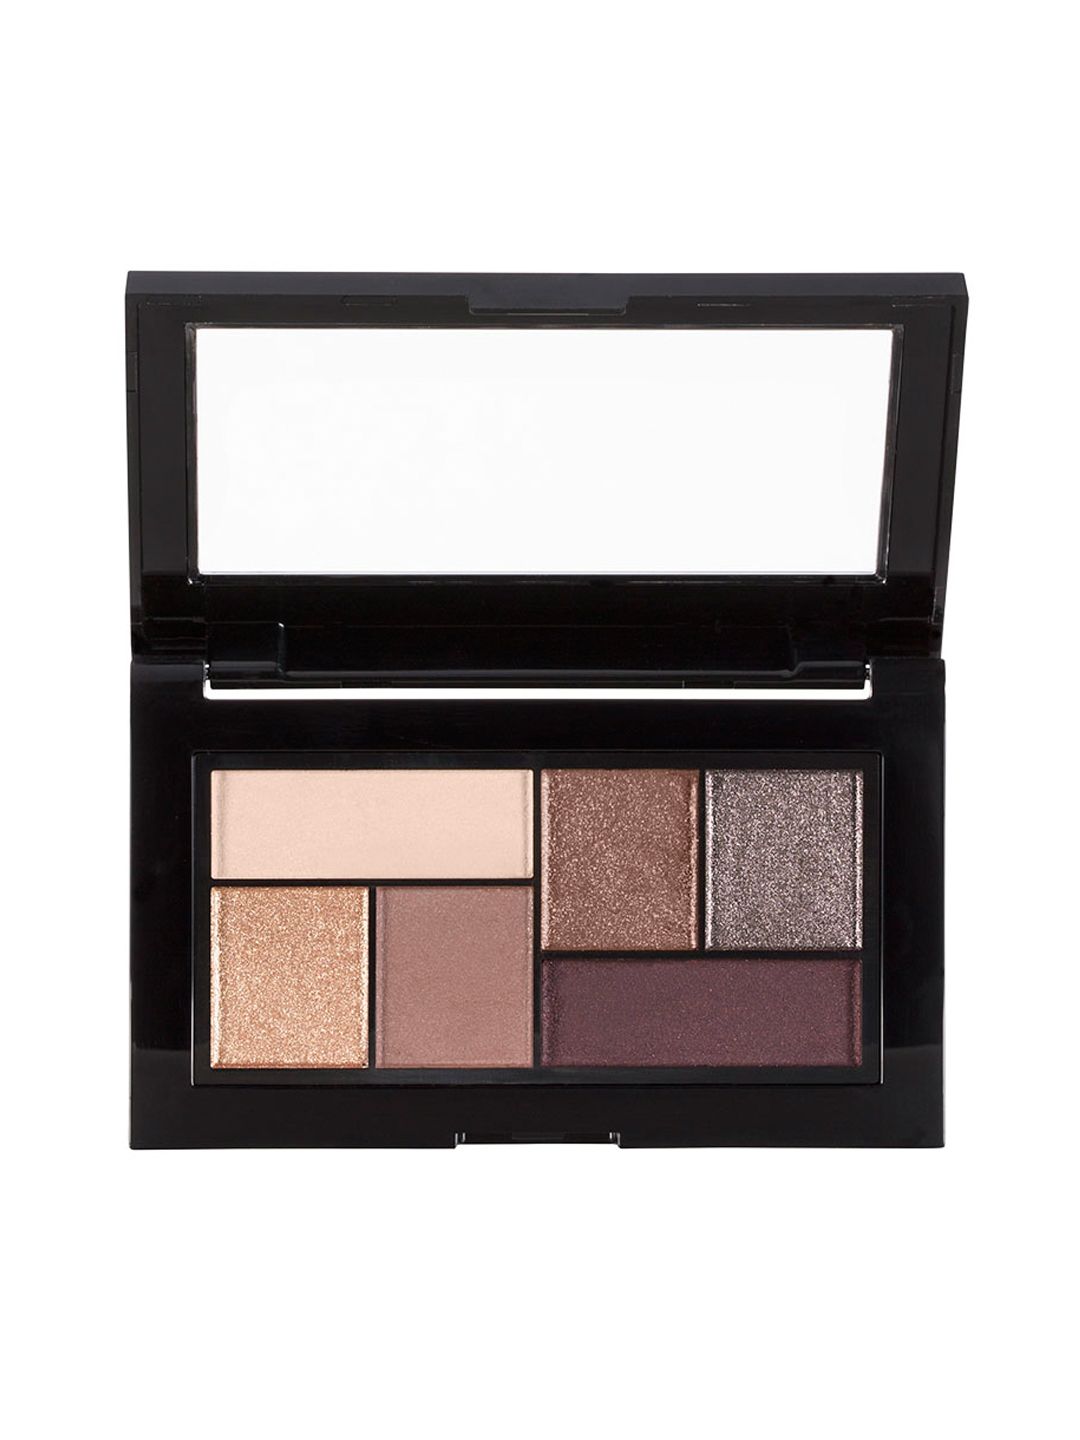 Maybelline New York The City Mini Eyeshadow Palette - Chill Brunch Neutrals Price in India